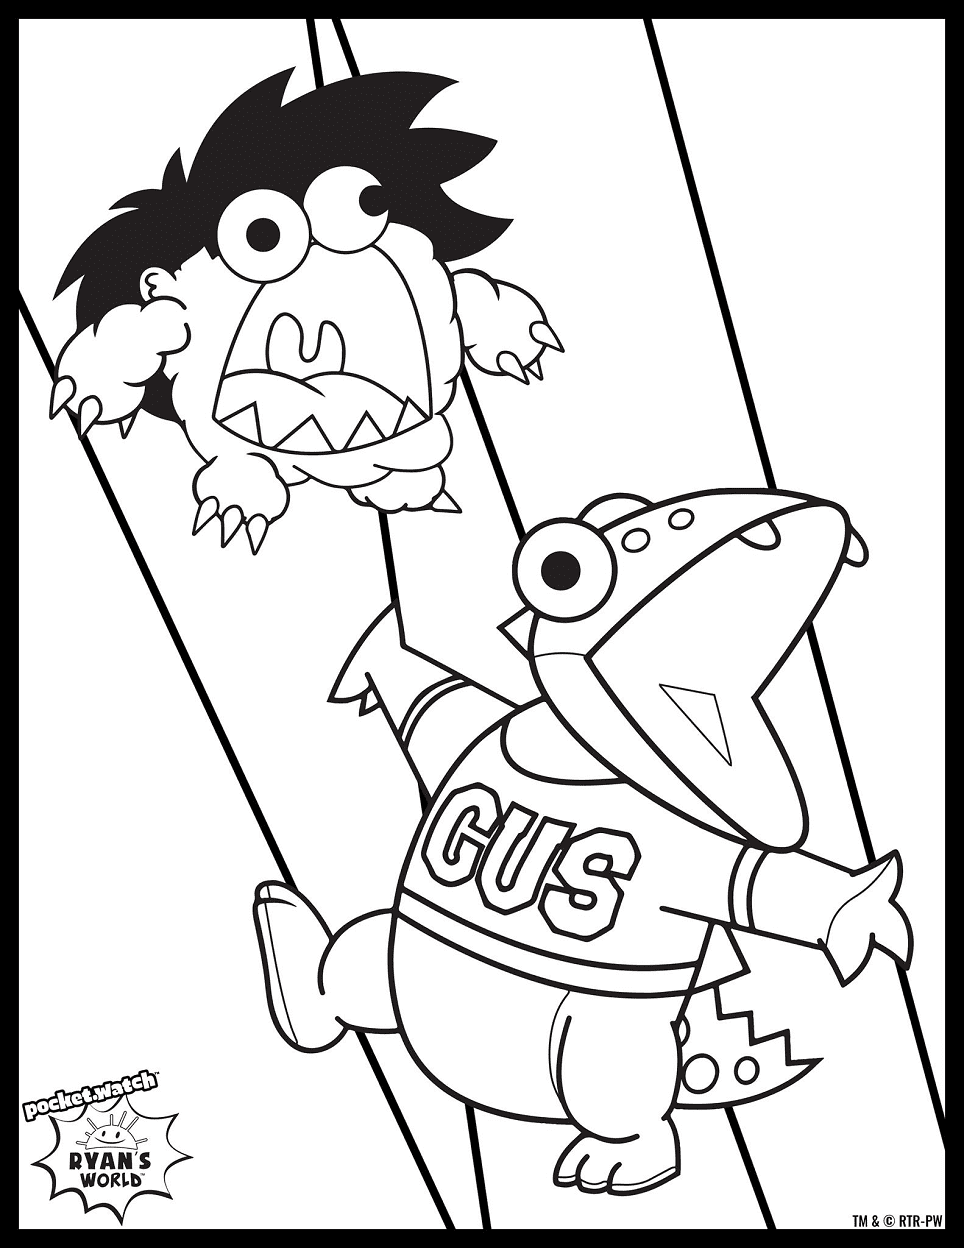 Gus and Moe Coloring Page